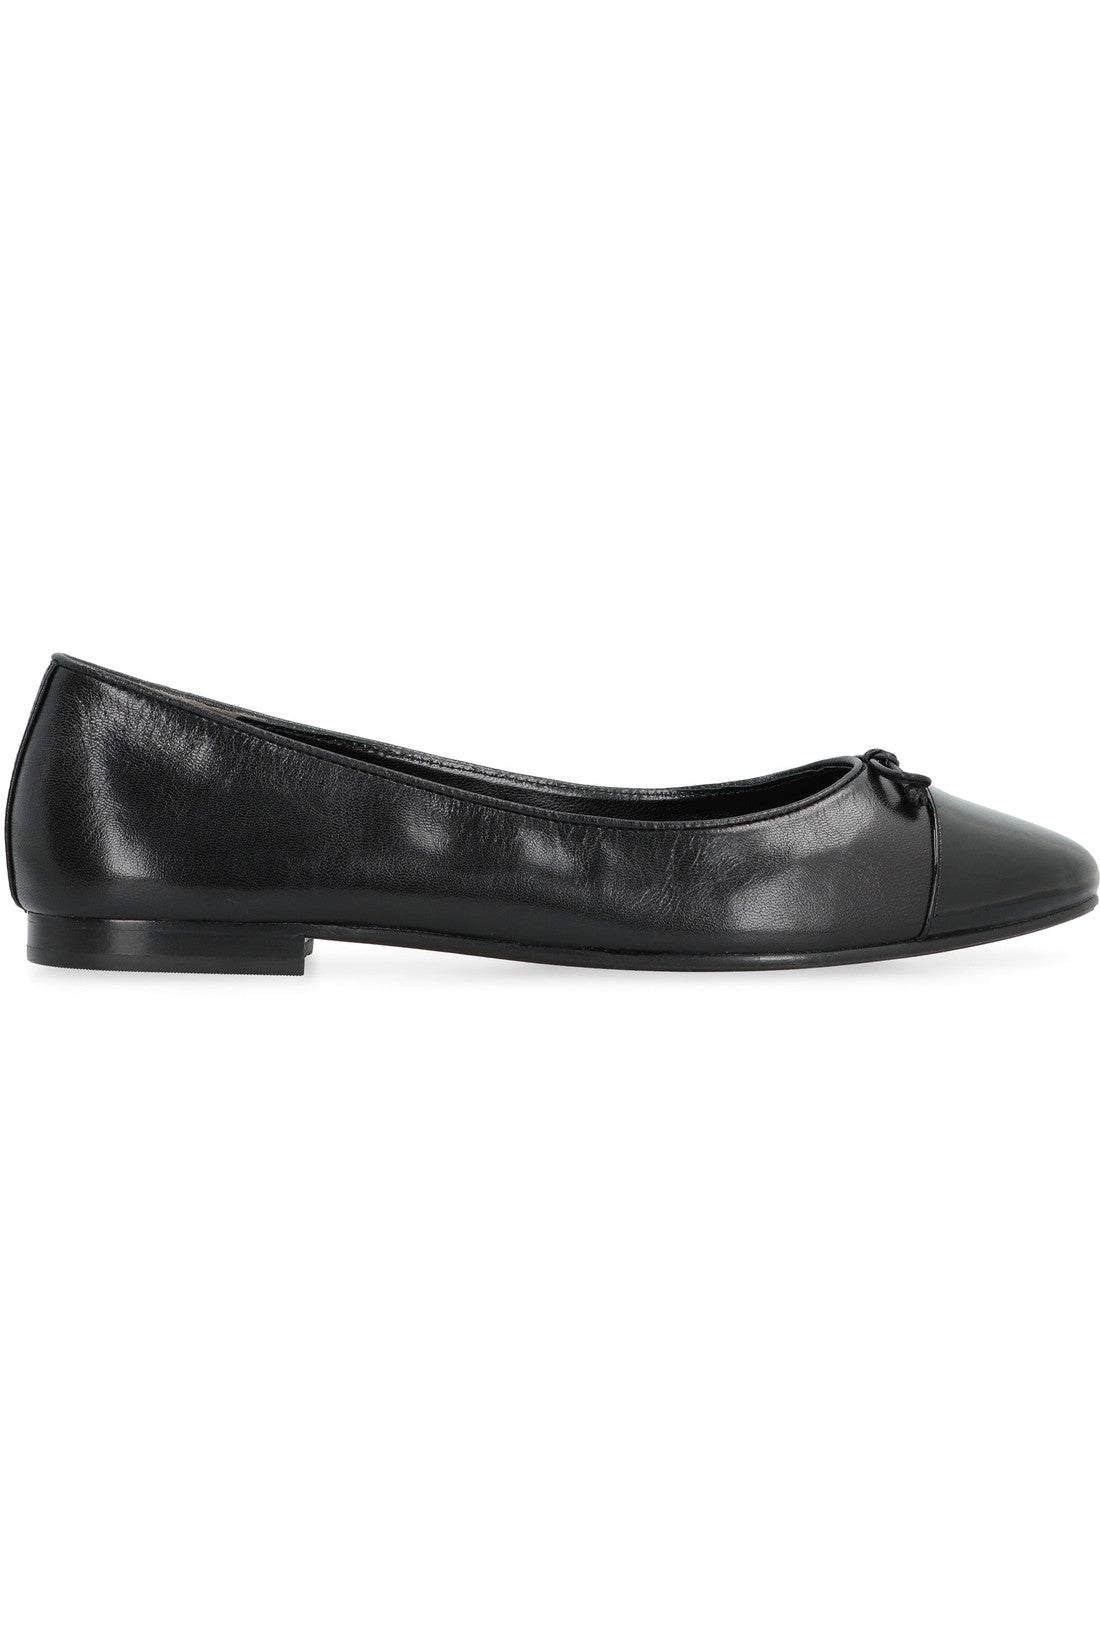 Tory Burch-OUTLET-SALE-Leather ballet flats with logo-ARCHIVIST